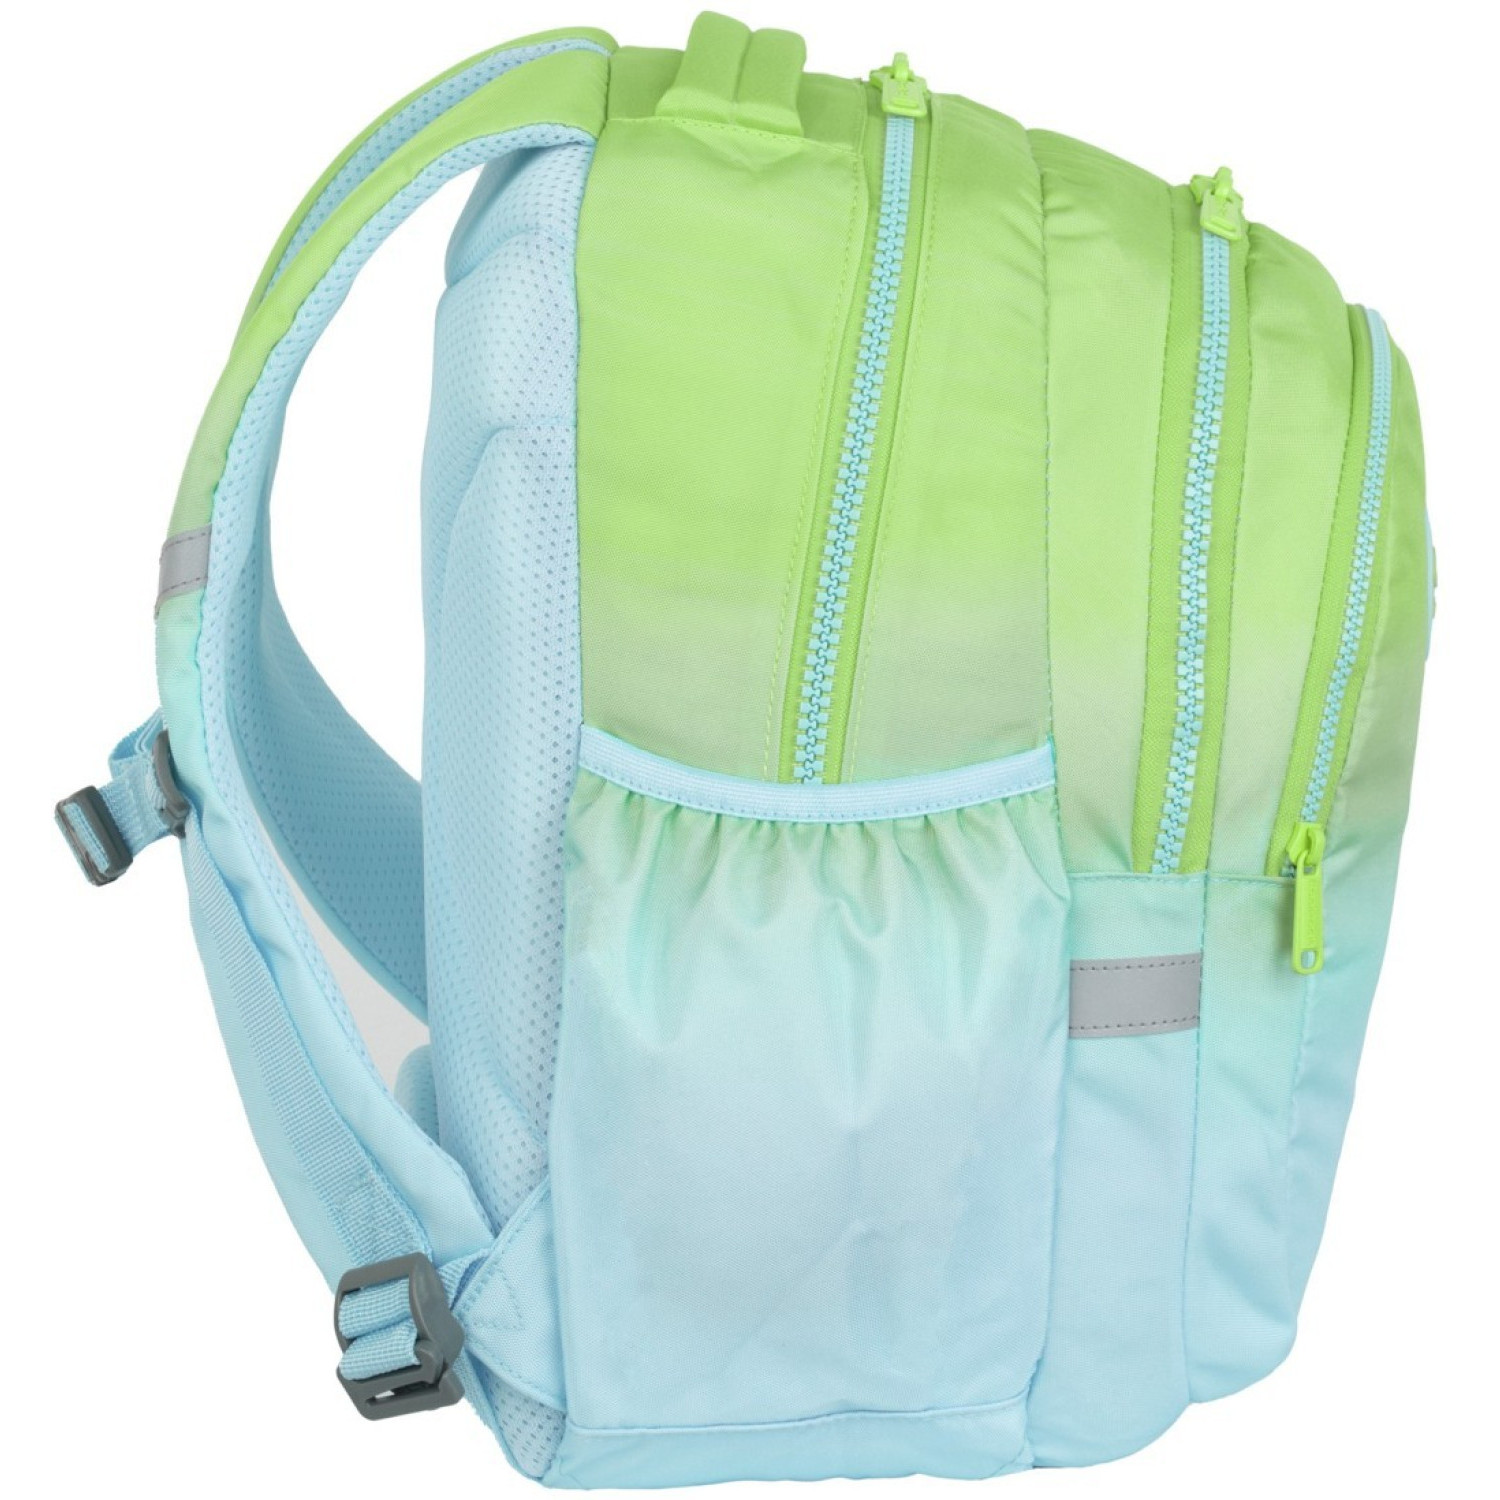 Раница Coolpack Jerry Gradient Mojito